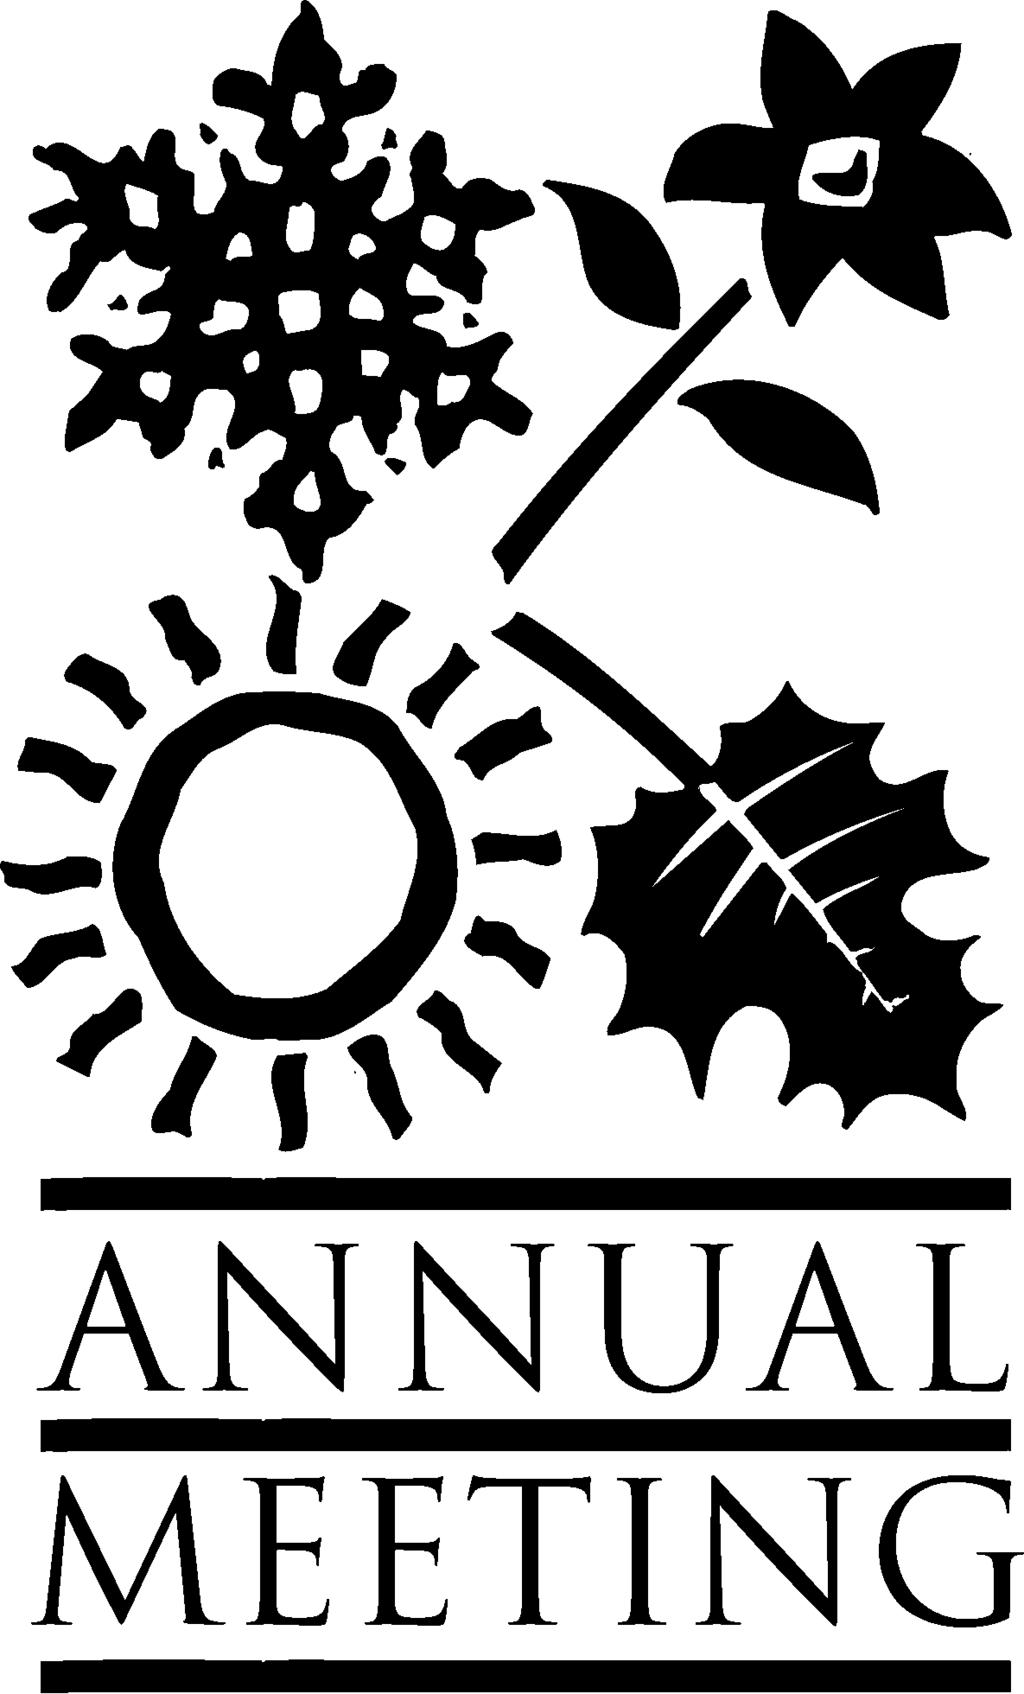 Today at 11:30 AM is the ANNUAL CONGREGATION MEETING with two items of business: 1.) Presentation of the Proposed 2016 General Fund Budget for congregation vote; 2.